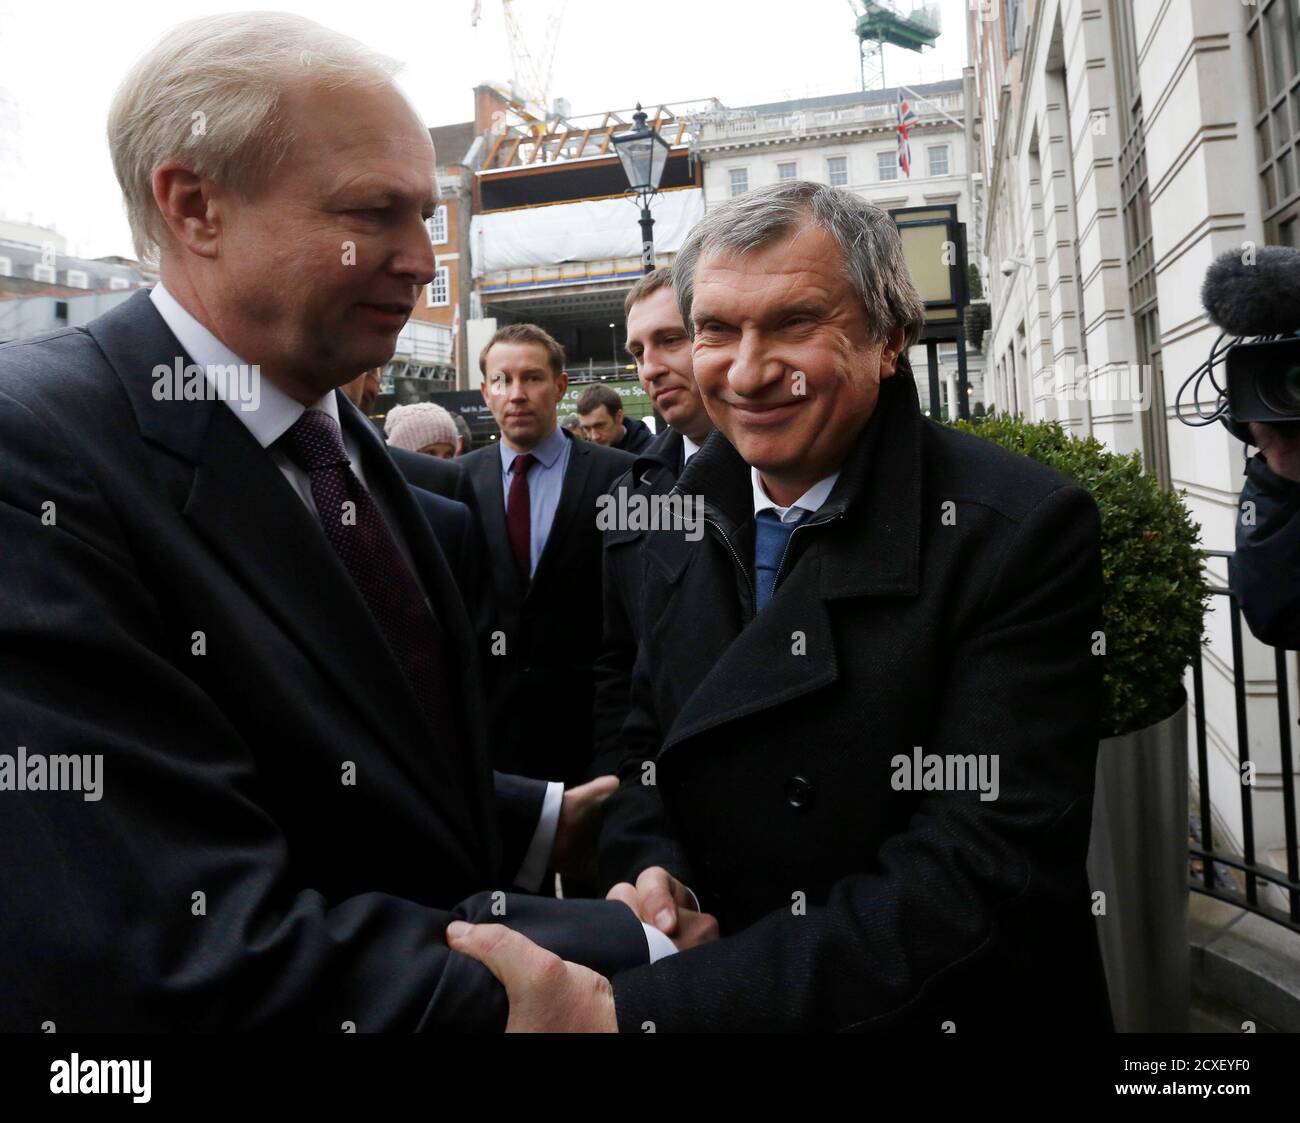 British Petroleum CEO Bob Dudley (L) and Rosneft CEO Igor Sechin shake hands outside the BP headquarters in central London March 21, 2013. Russian state oil company Rosneft closed its deal to buy TNK-BP from UK-based BP and four tycoons on Thursday, releasing $40 billion cash to the sellers and becoming a bigger oil producer than Exxon Mobil. The $55 billion deal, which also gives BP a near 20 percent stake in Rosneft, was announced last year after months of on-off negotiations. It is the biggest in Russia's corporate history.. REUTERS/Olivia Harris (BRITAIN - Tags: BUSINESS POLITICS ENERGY) Stock Photo